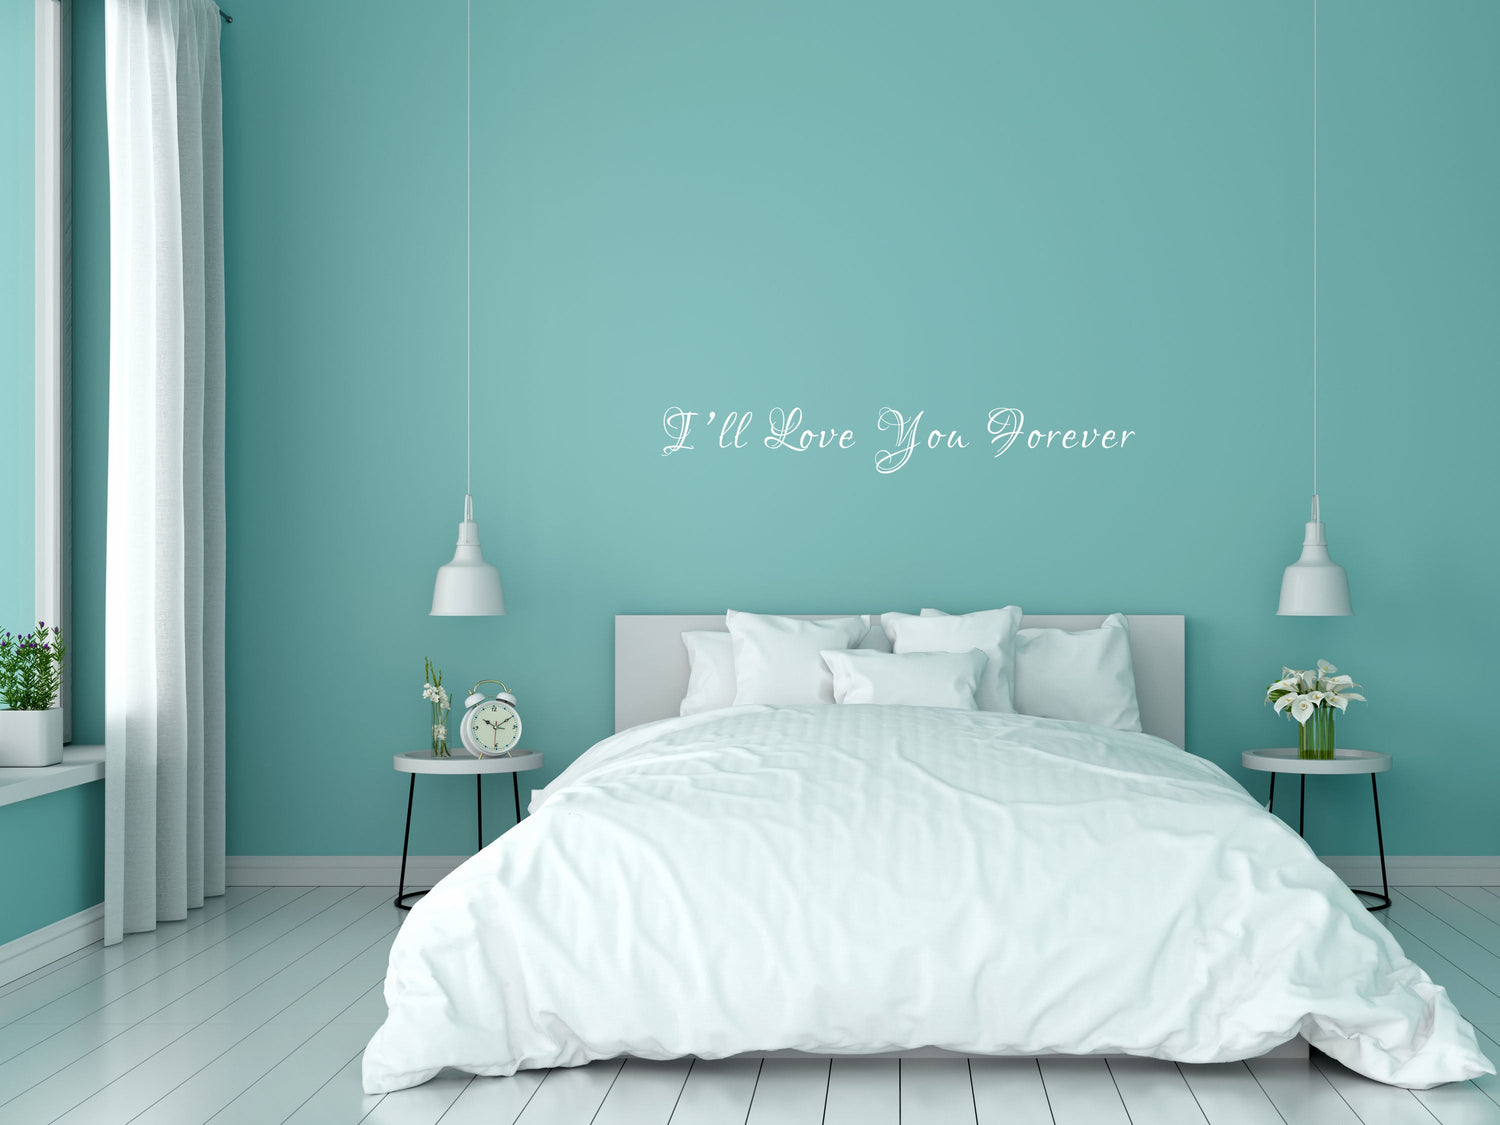 I'll Love You Forever Vinyl Wall Decal Inspirational Wall Signs 